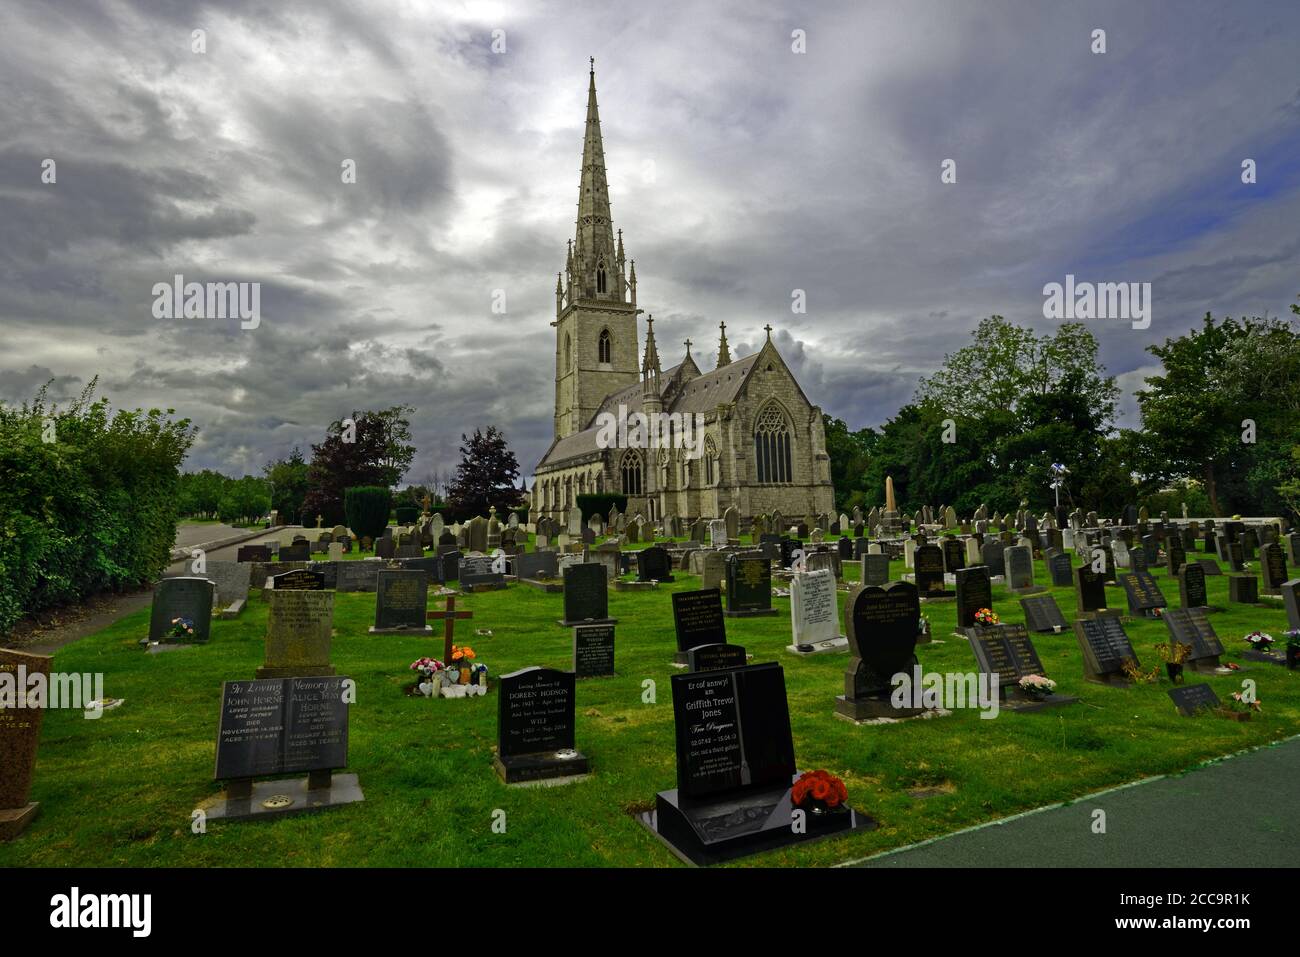 St Margaret's Church (The Marble Church) in Bodelwyddan, North Wales, was constructed in the 1850s. It is a Gothic Style parish church. Stock Photo